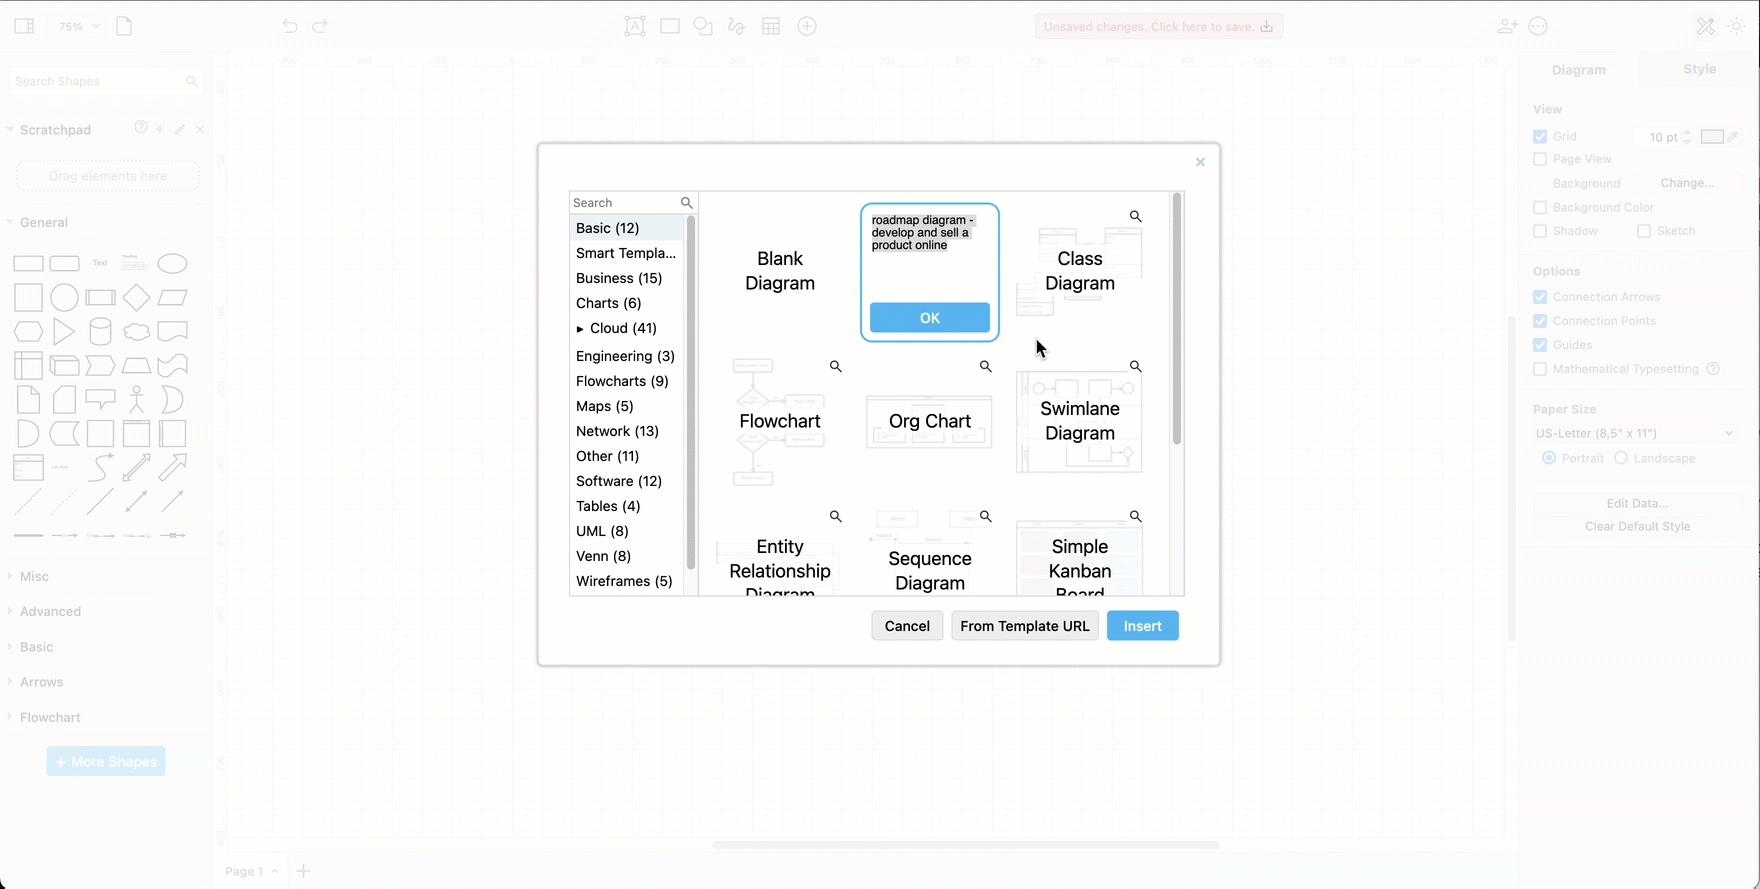 Use the Smart Template generator to automatically generate a custom roadmap or timeline diagram from a text description